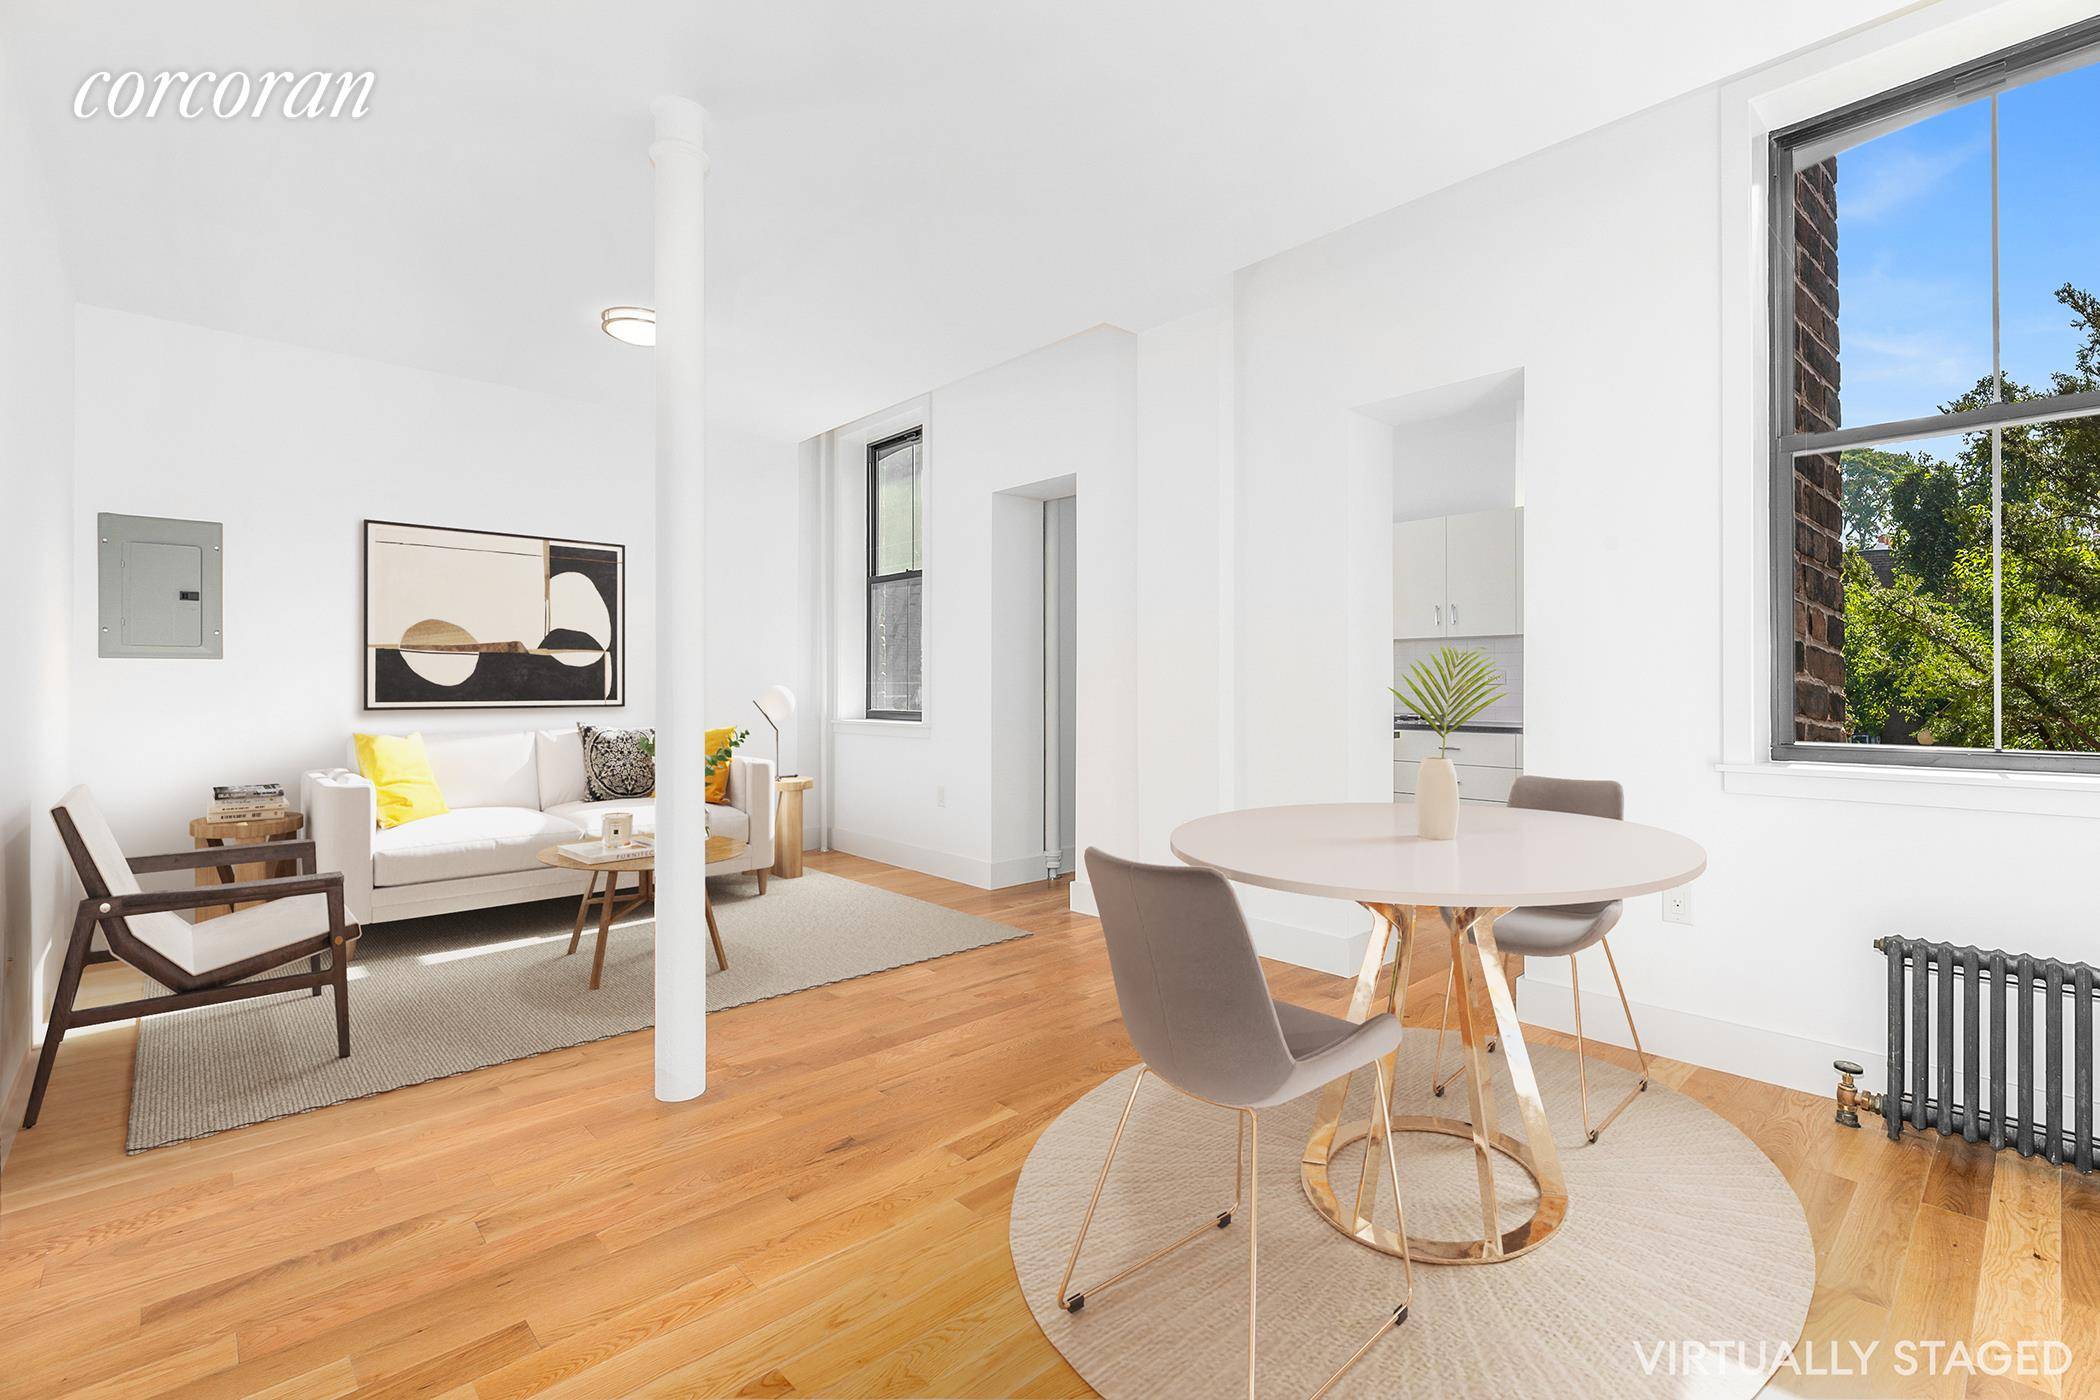 Located in historic Cobble Hill, this two bedroom, one bath condominium has undergone a complete renovation.